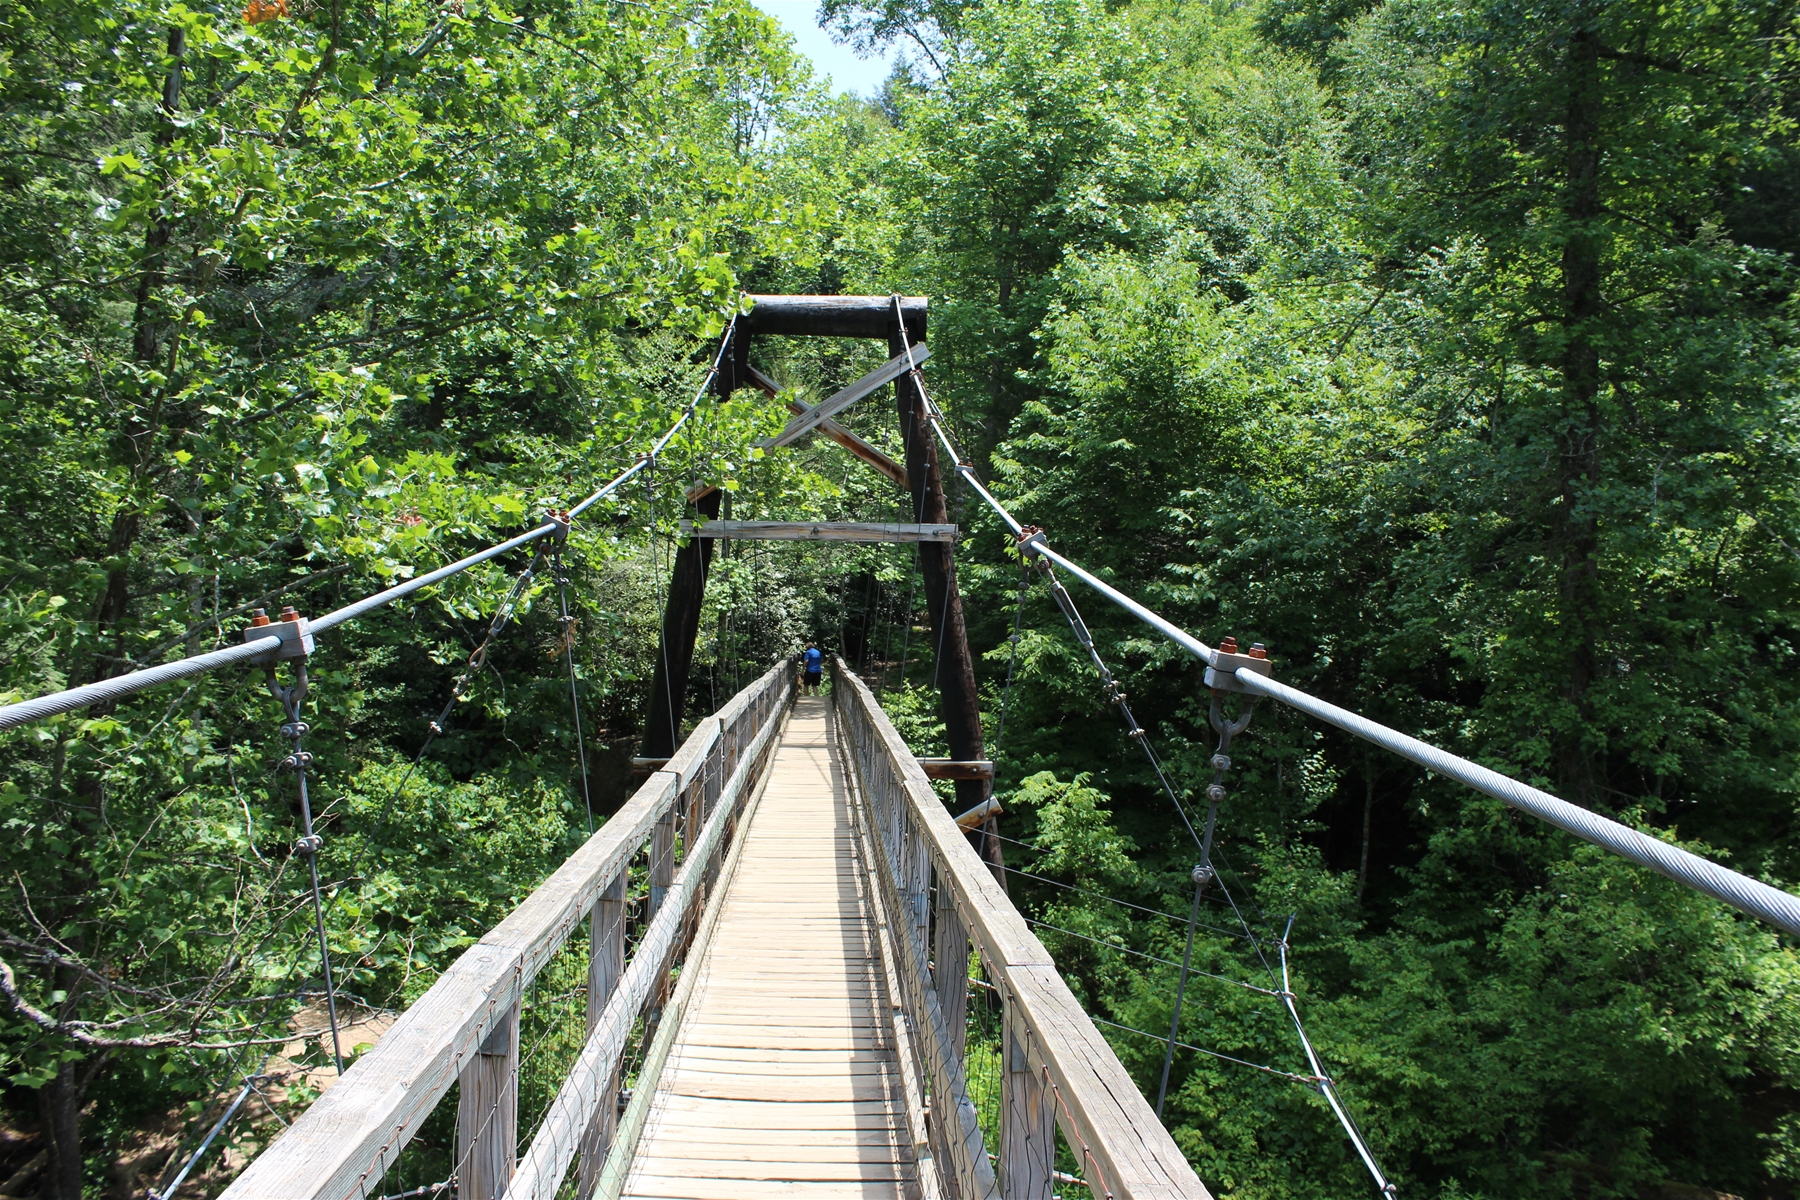 The Iconic Swinging Bridge over the Toccoa River